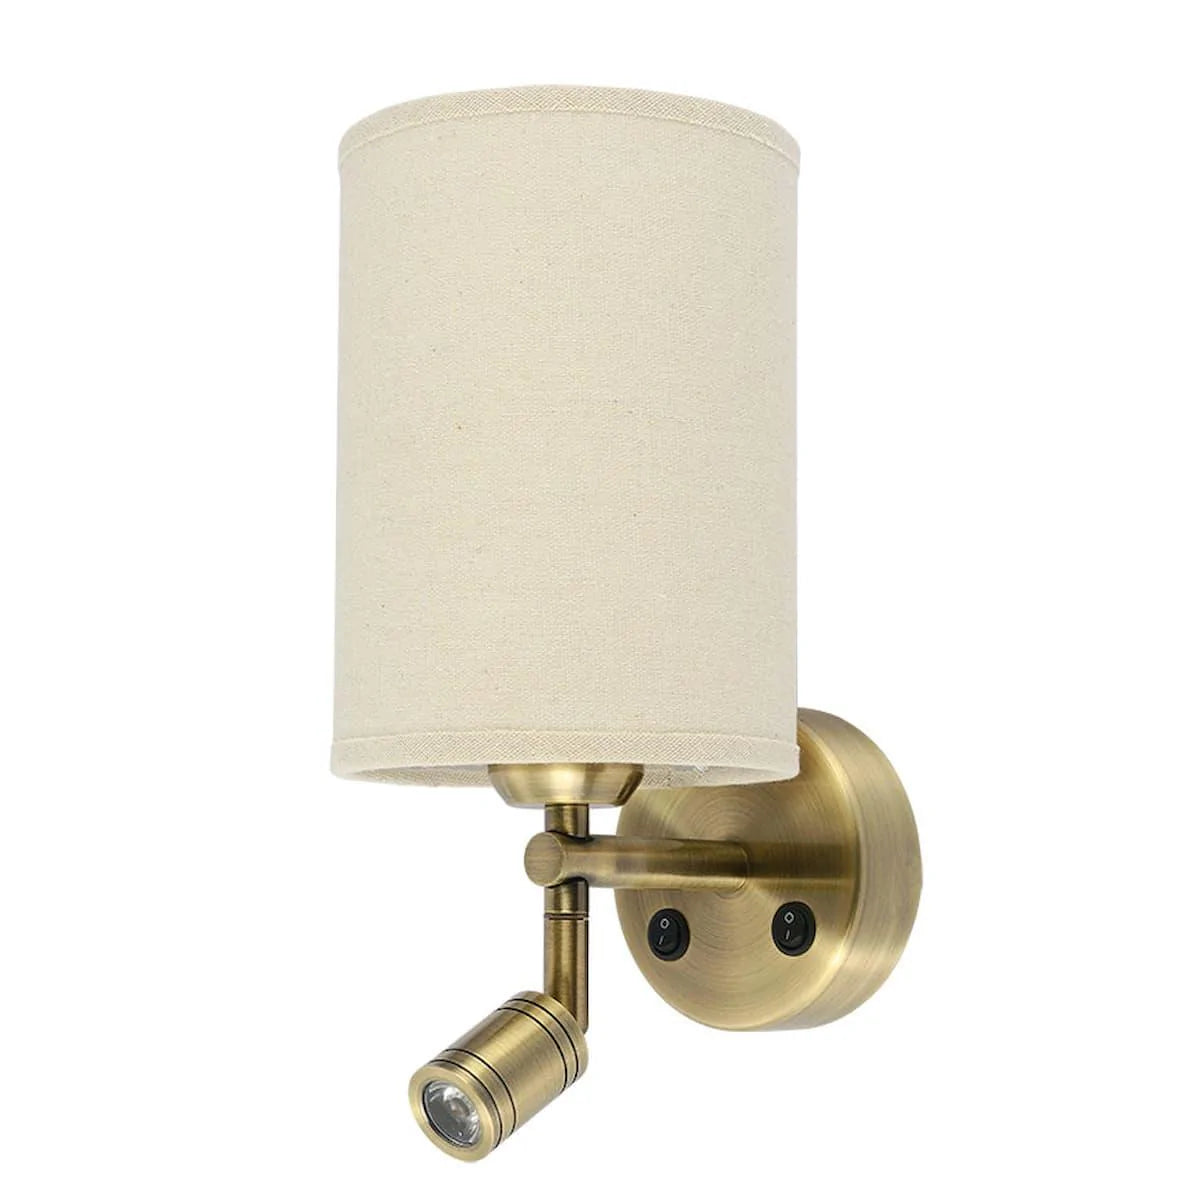 Ashley antique brass wall light complete with oatmeal shade